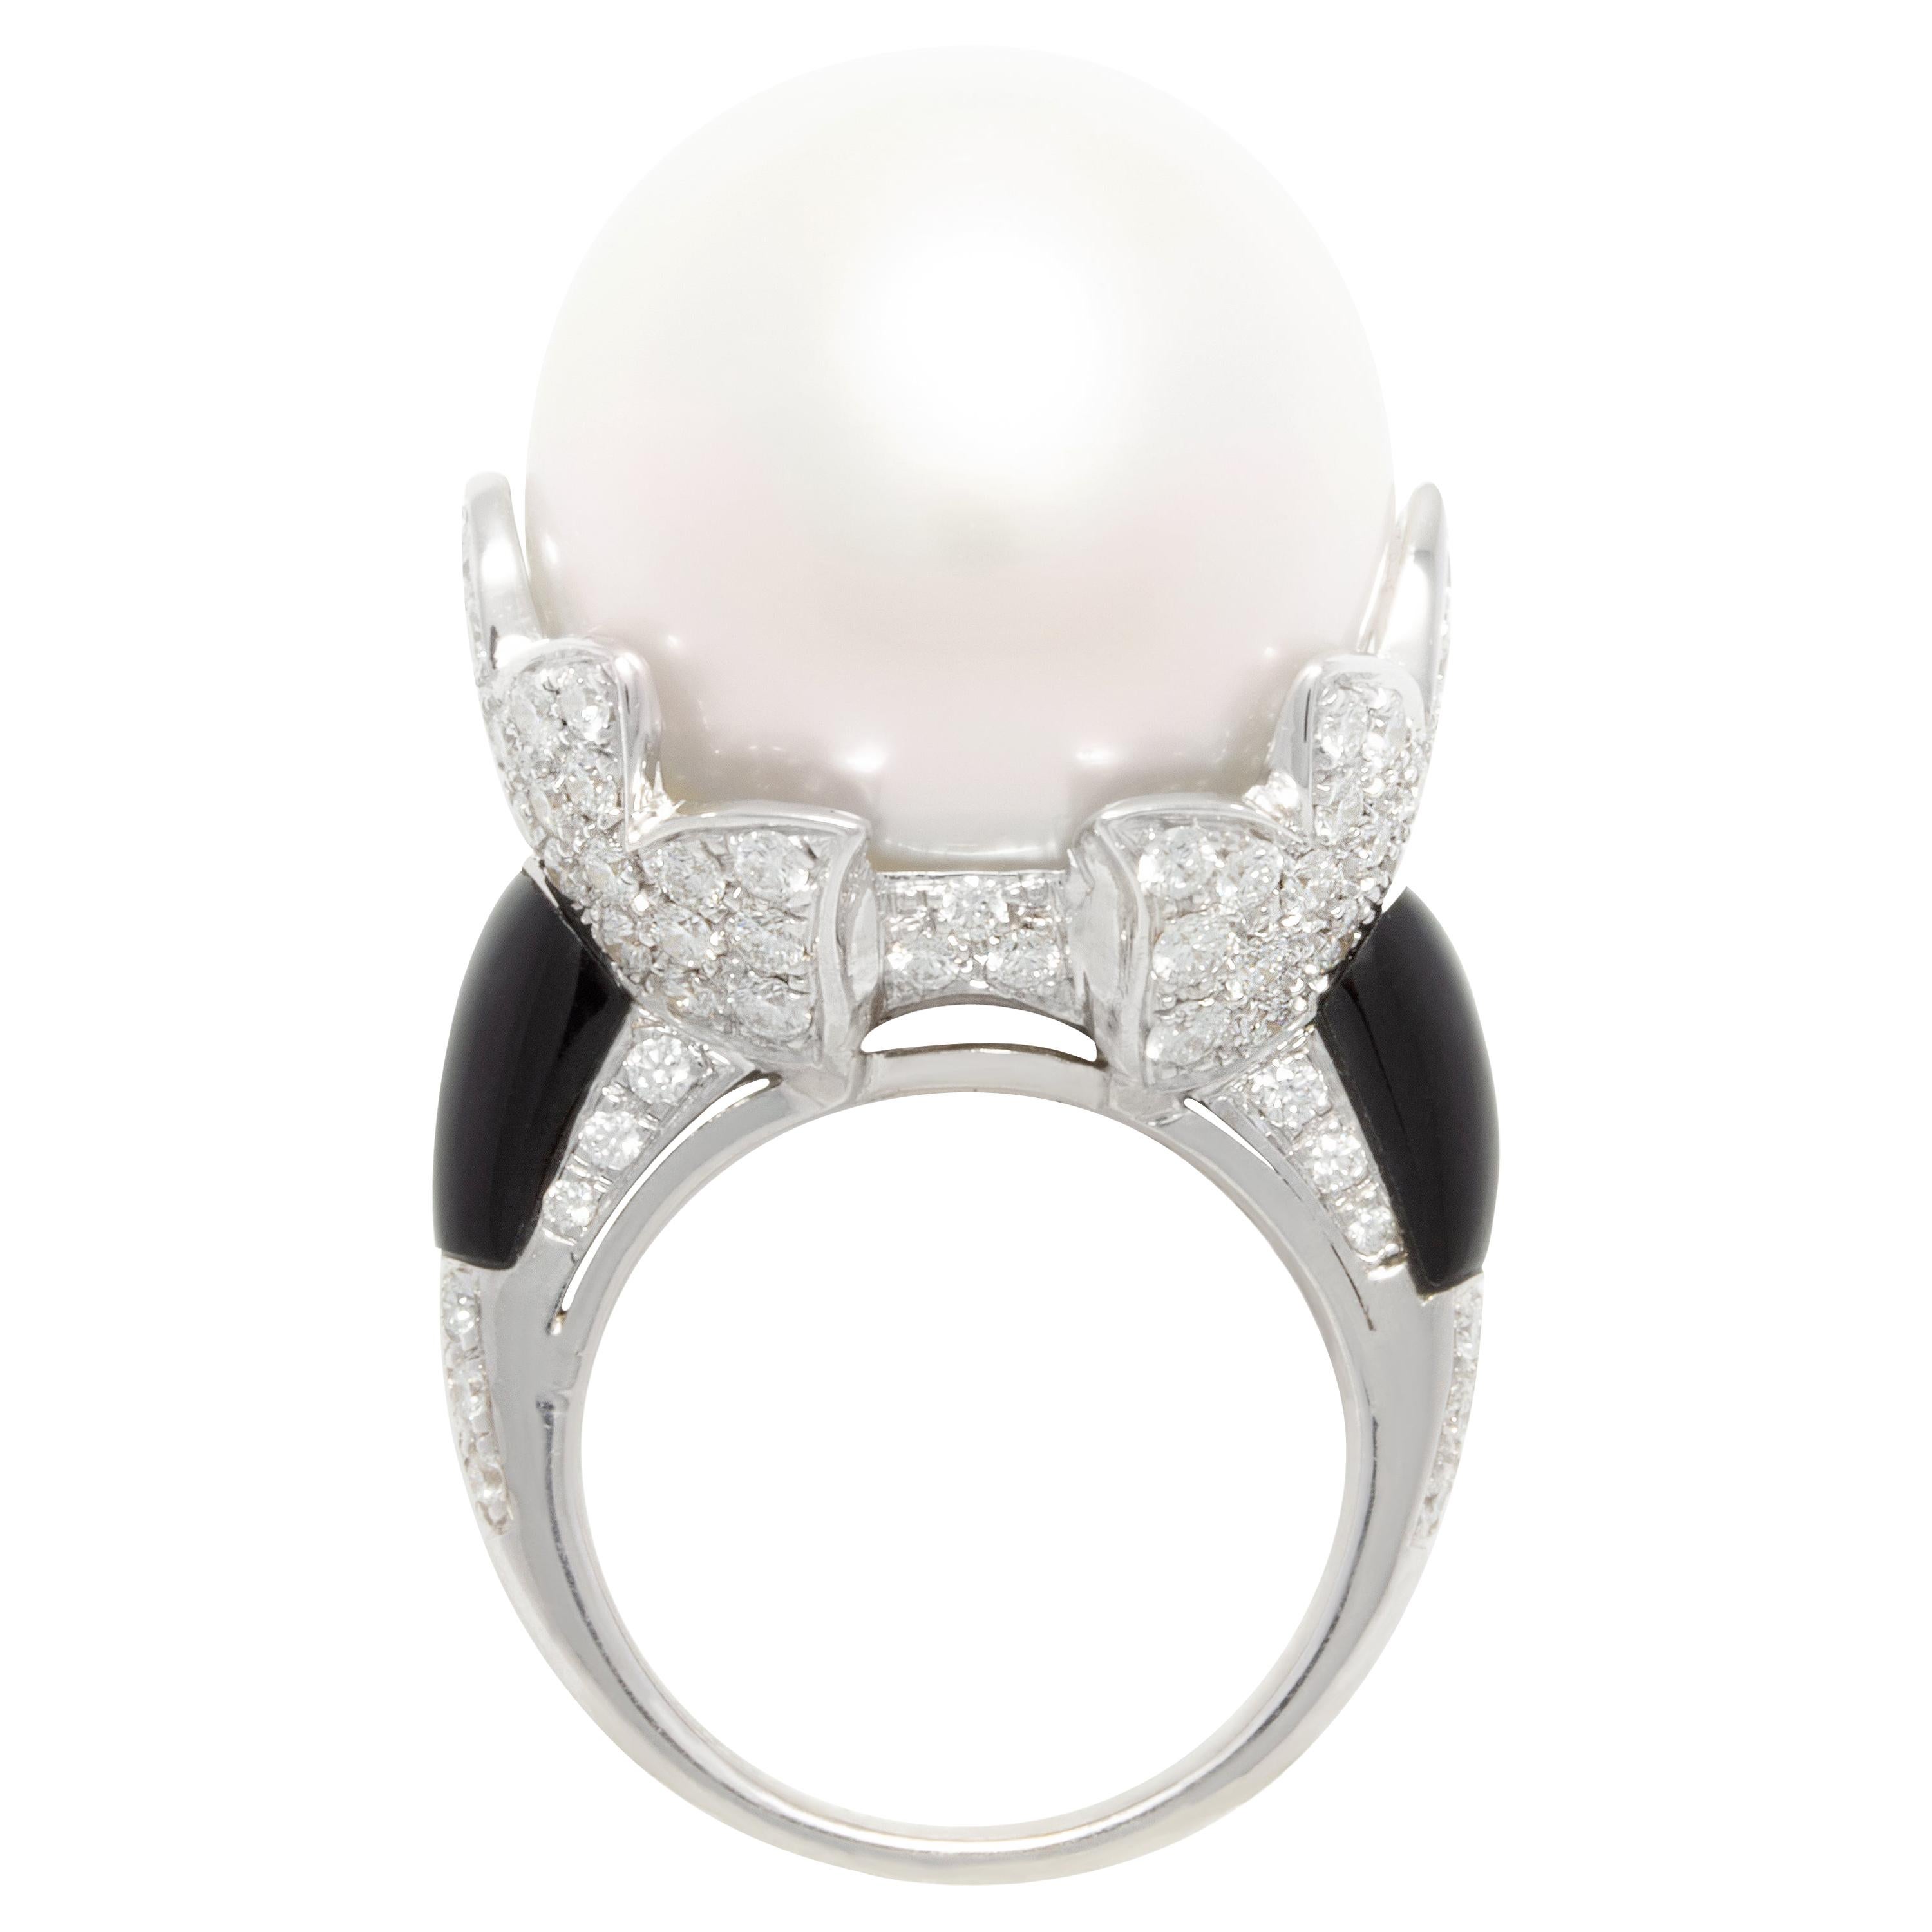 Ella Gafter Art Déco style 20mm Pearl Diamond Ring 